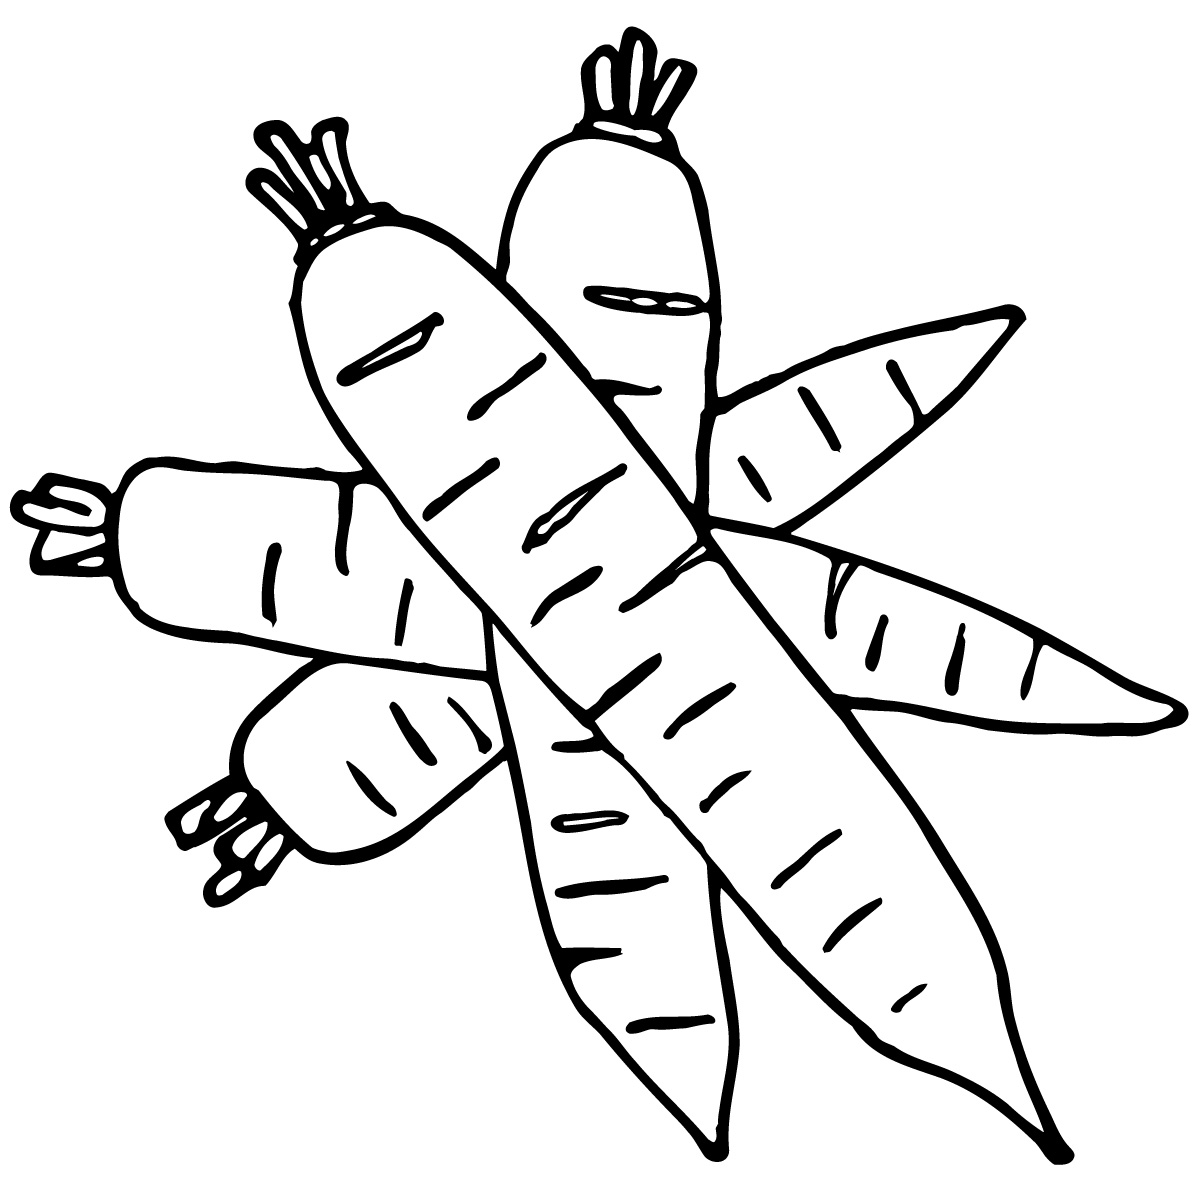 Carrots coloring page